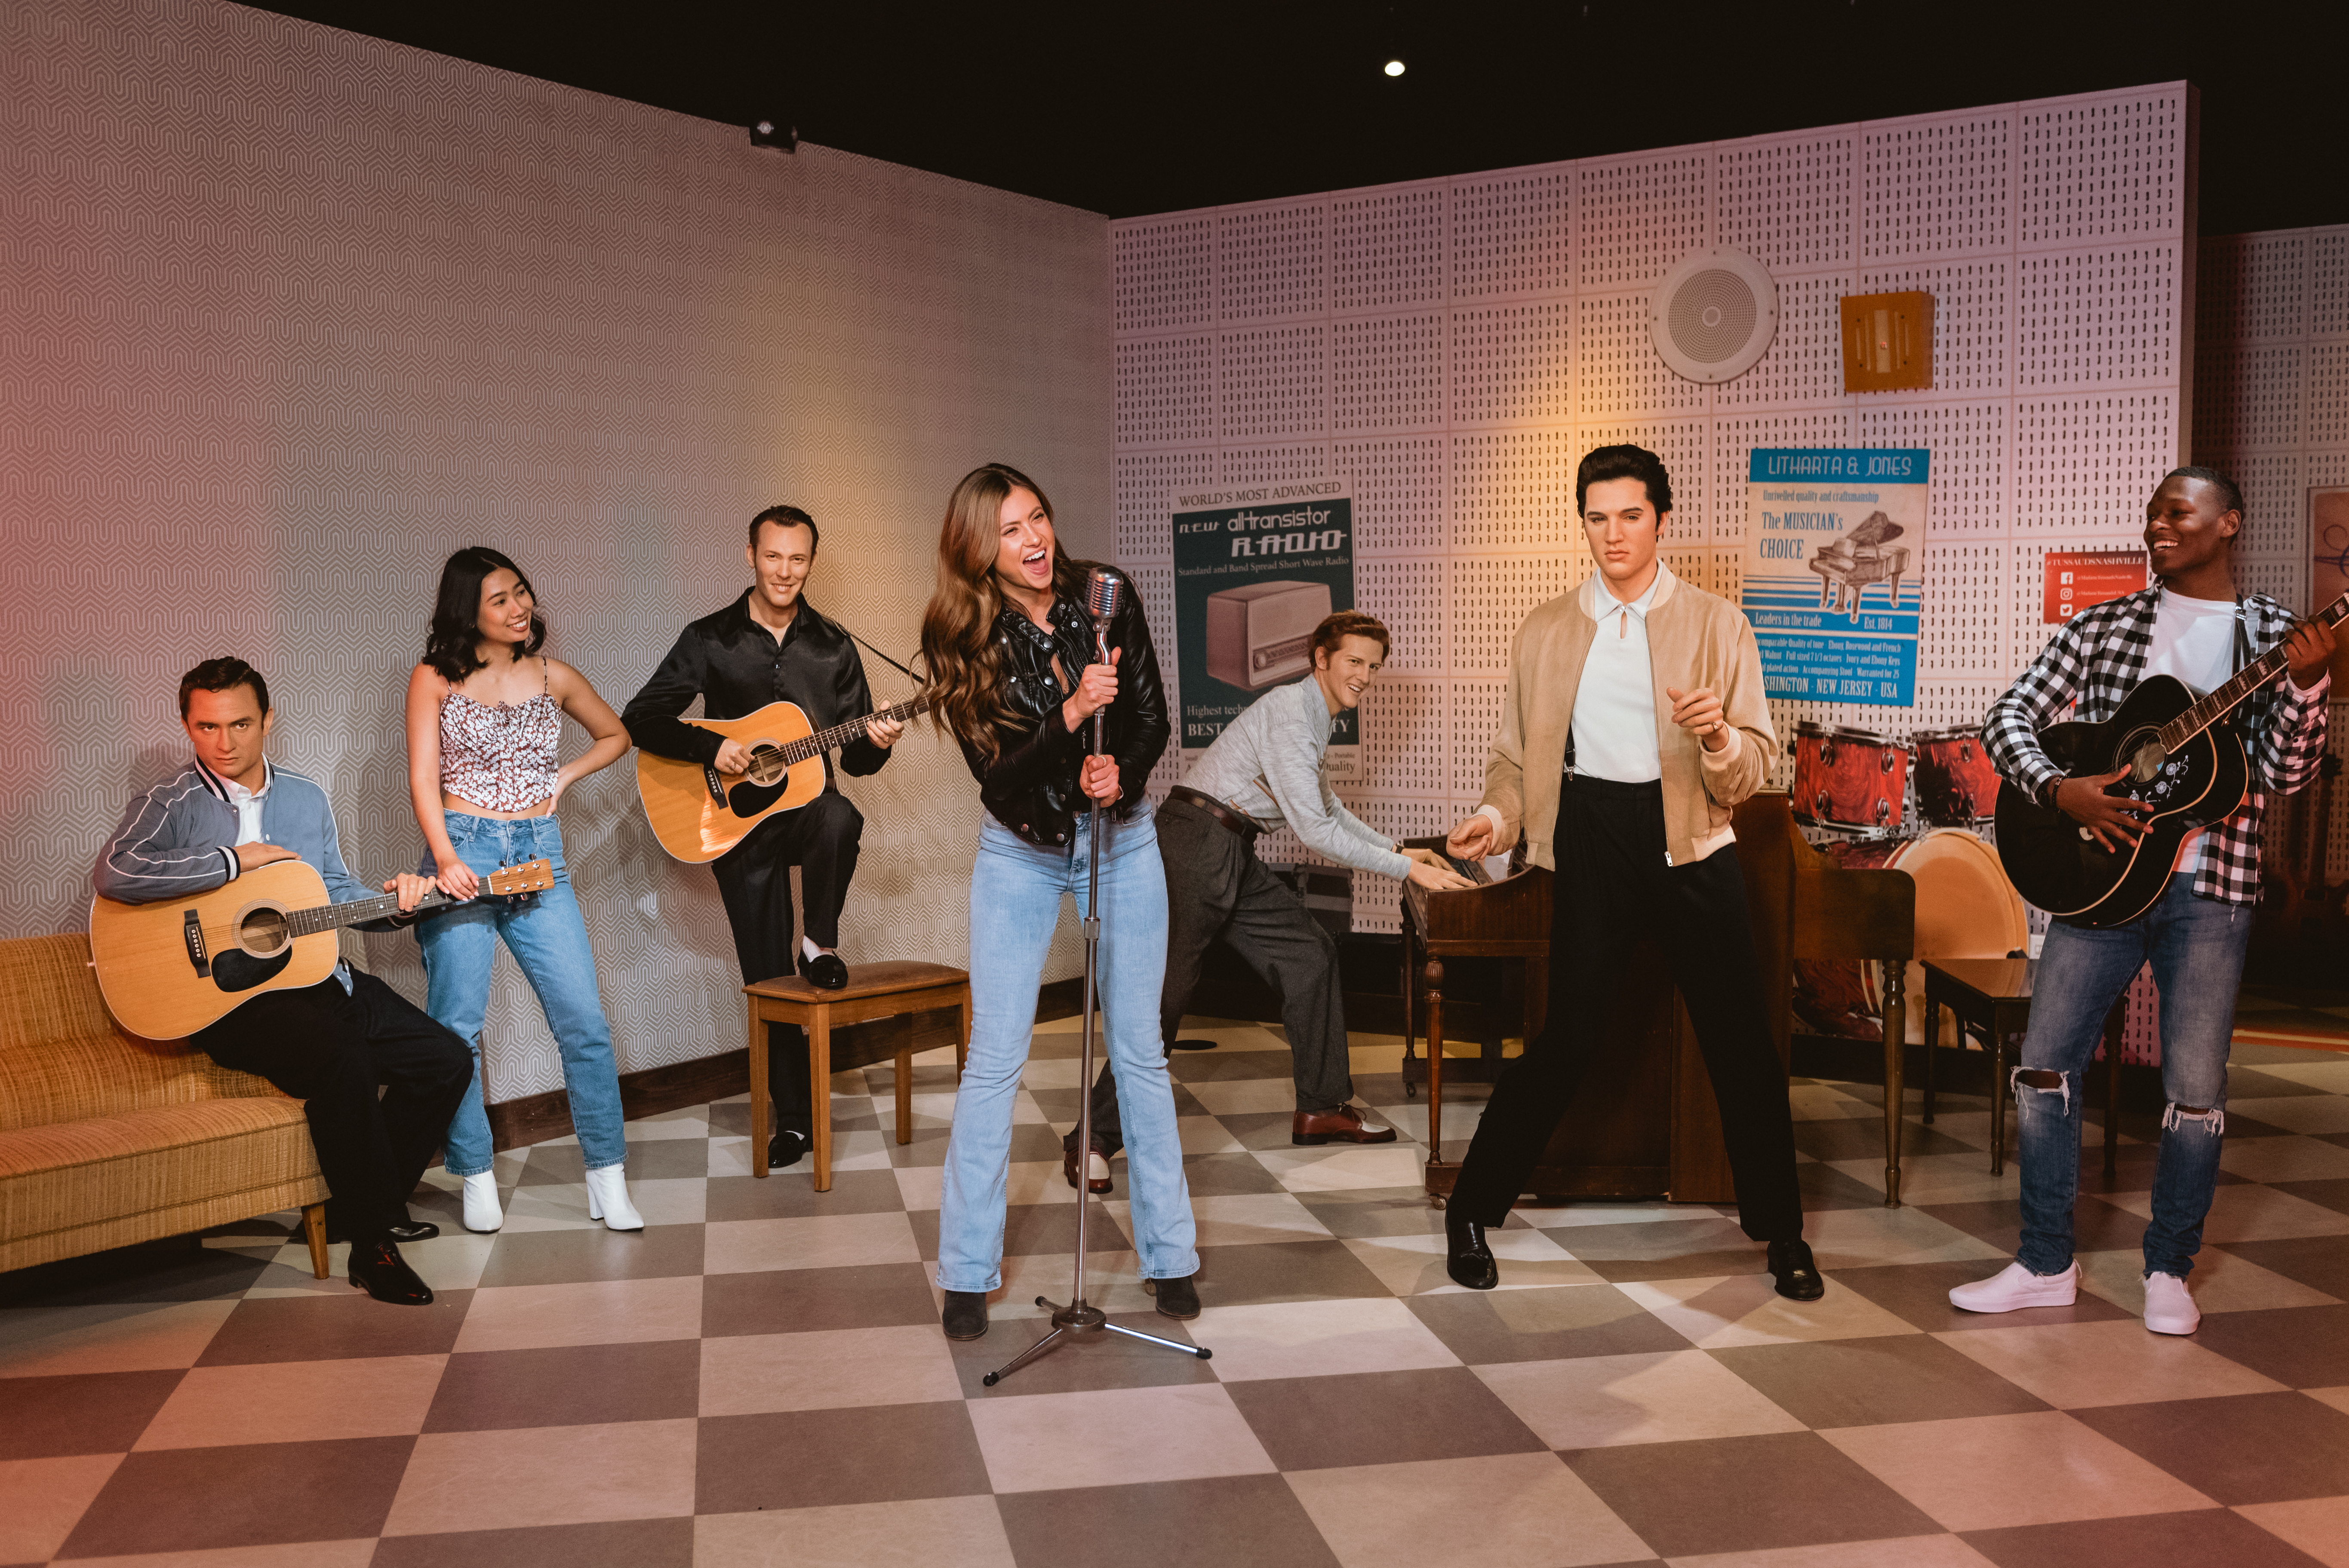 Visit Nashville's must see celebrity wax museum, with over 60+  iconic wax figures to get up close and personal to! Book your tickets to Madame Tussauds Nashville online today.